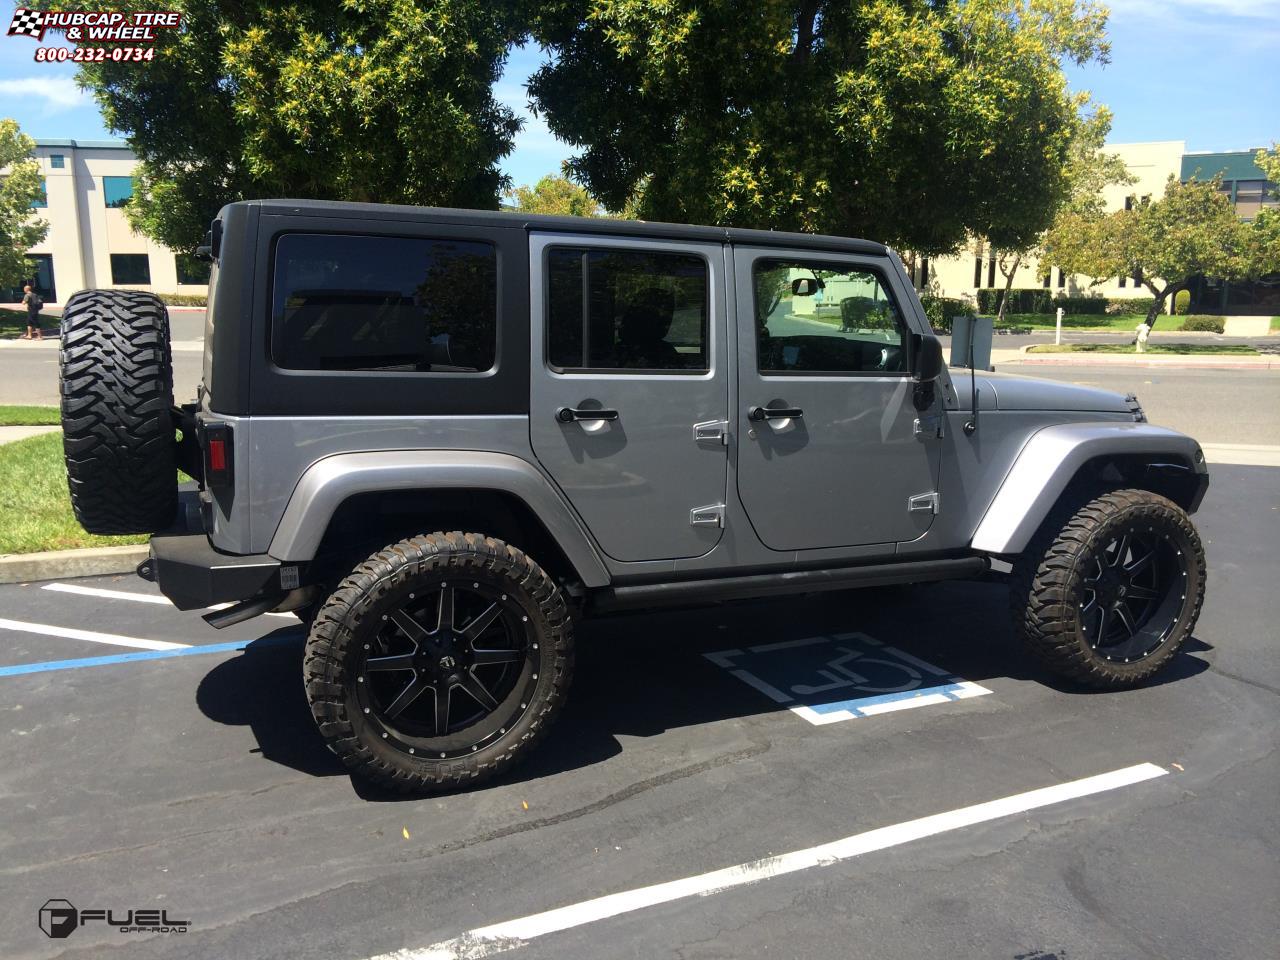 vehicle gallery/jeep wrangler fuel maverick d538 22X10  Black & Milled wheels and rims